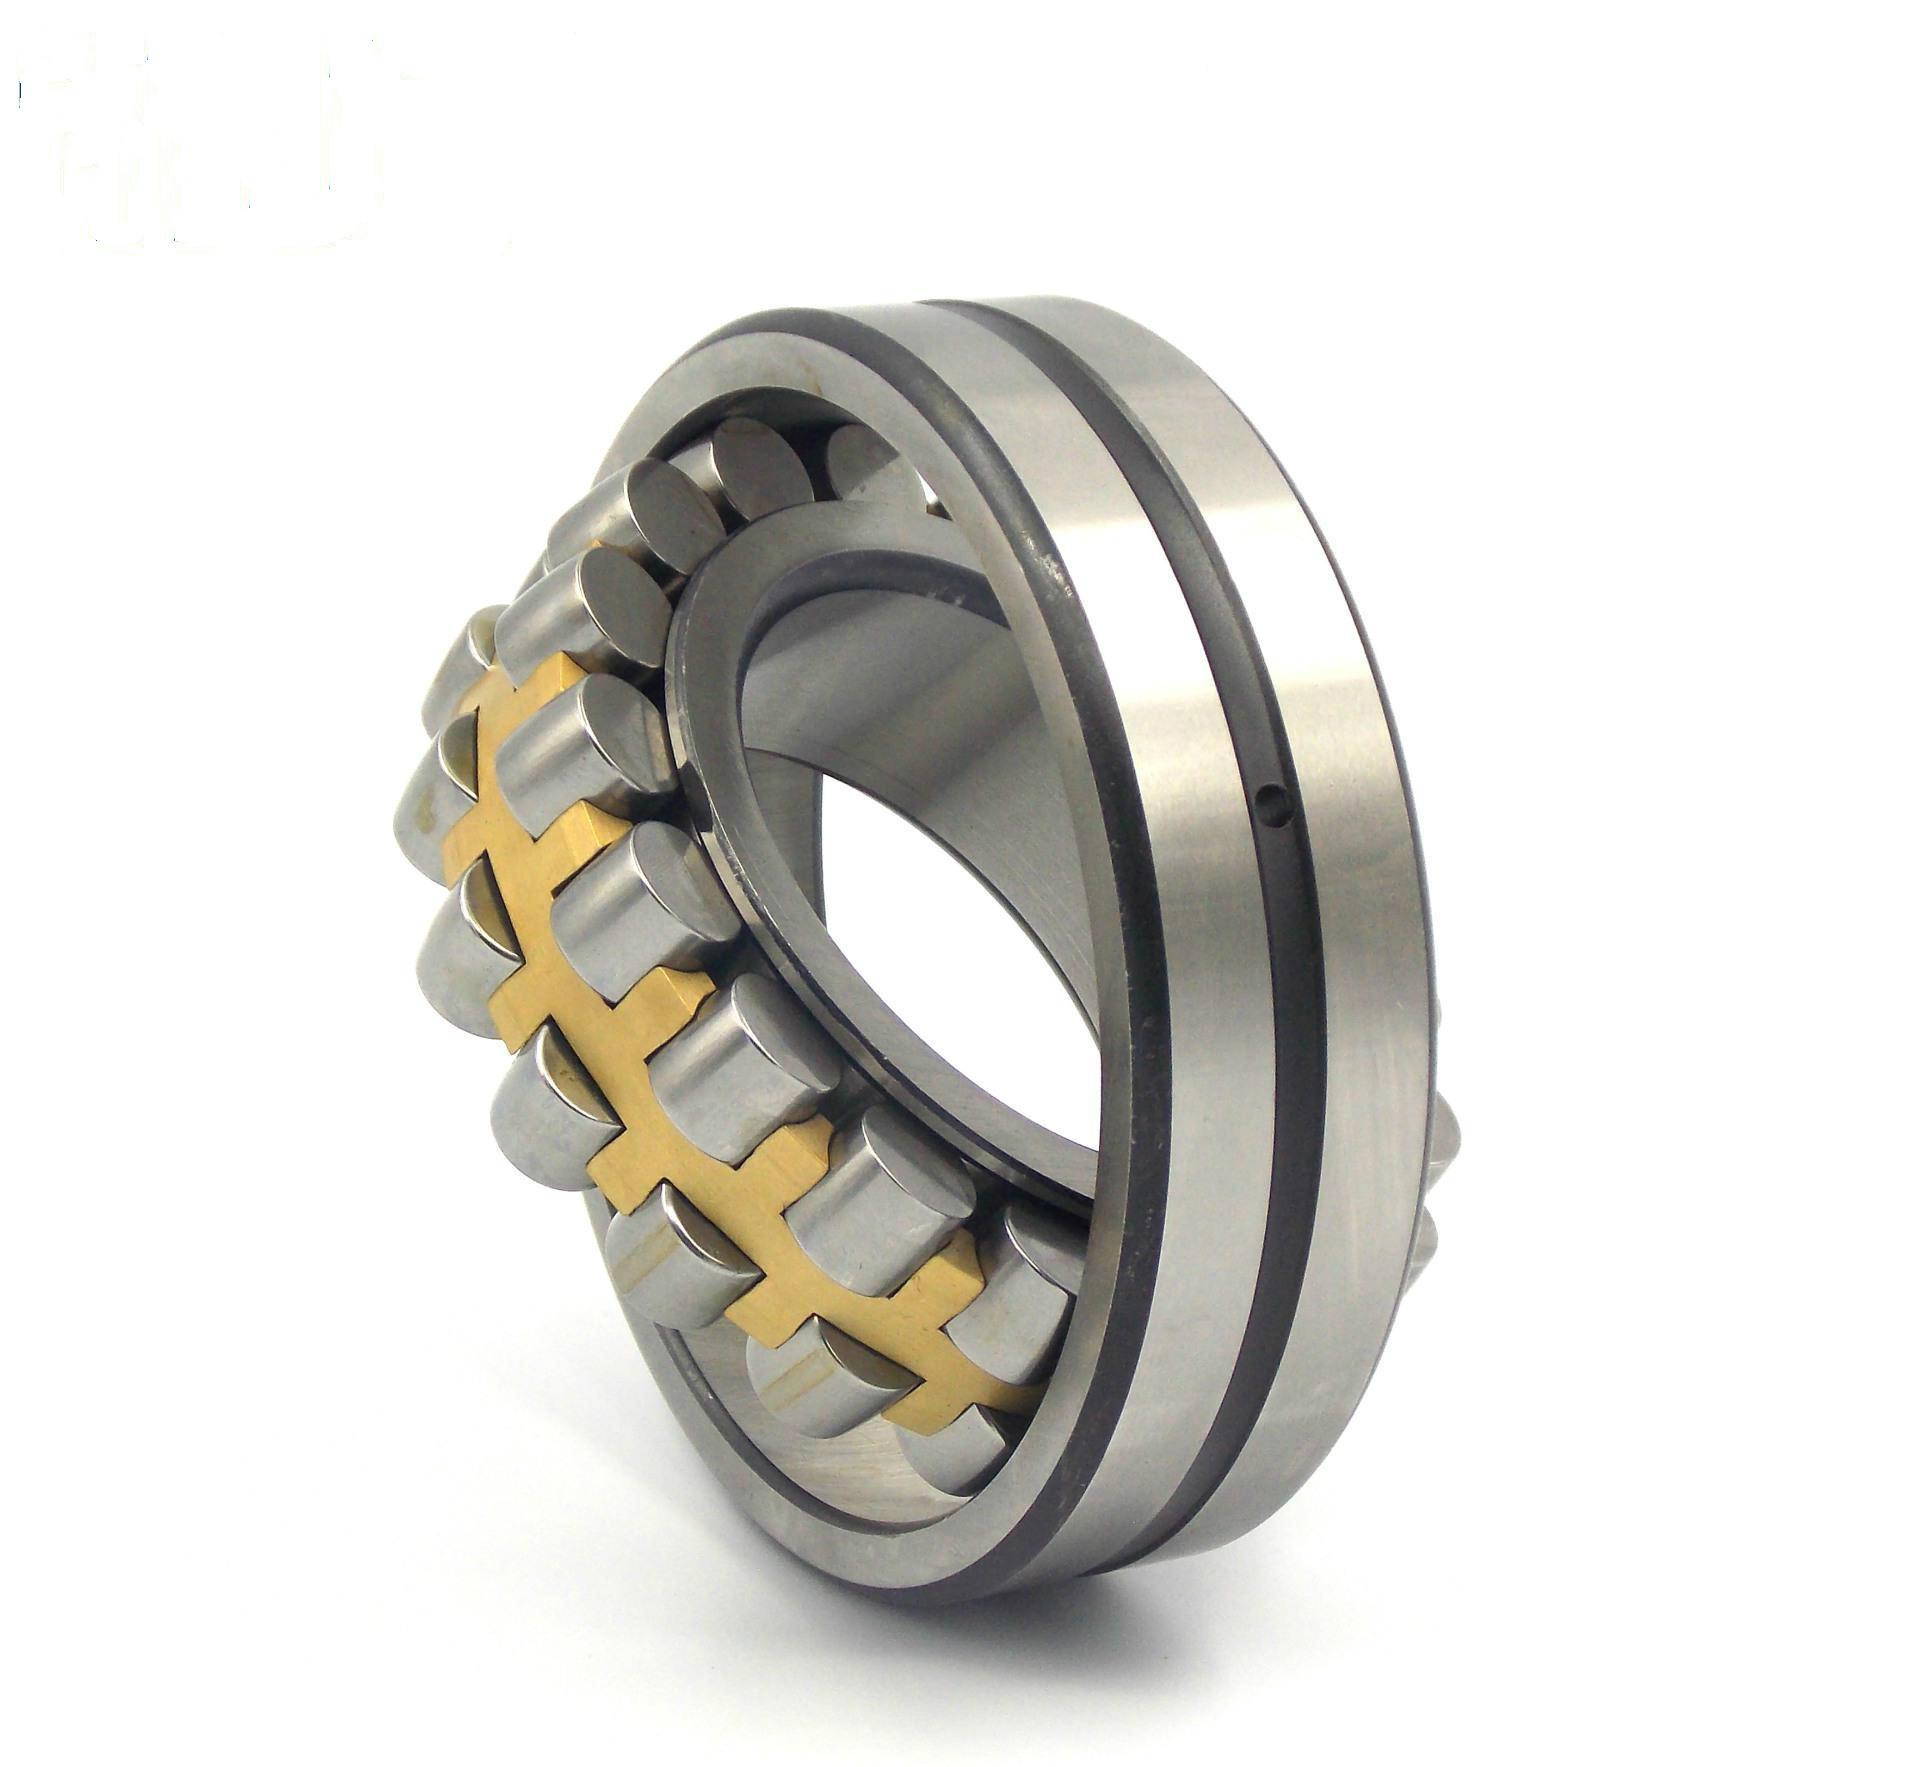  NU 12/500 MA Cylindrical roller bearing